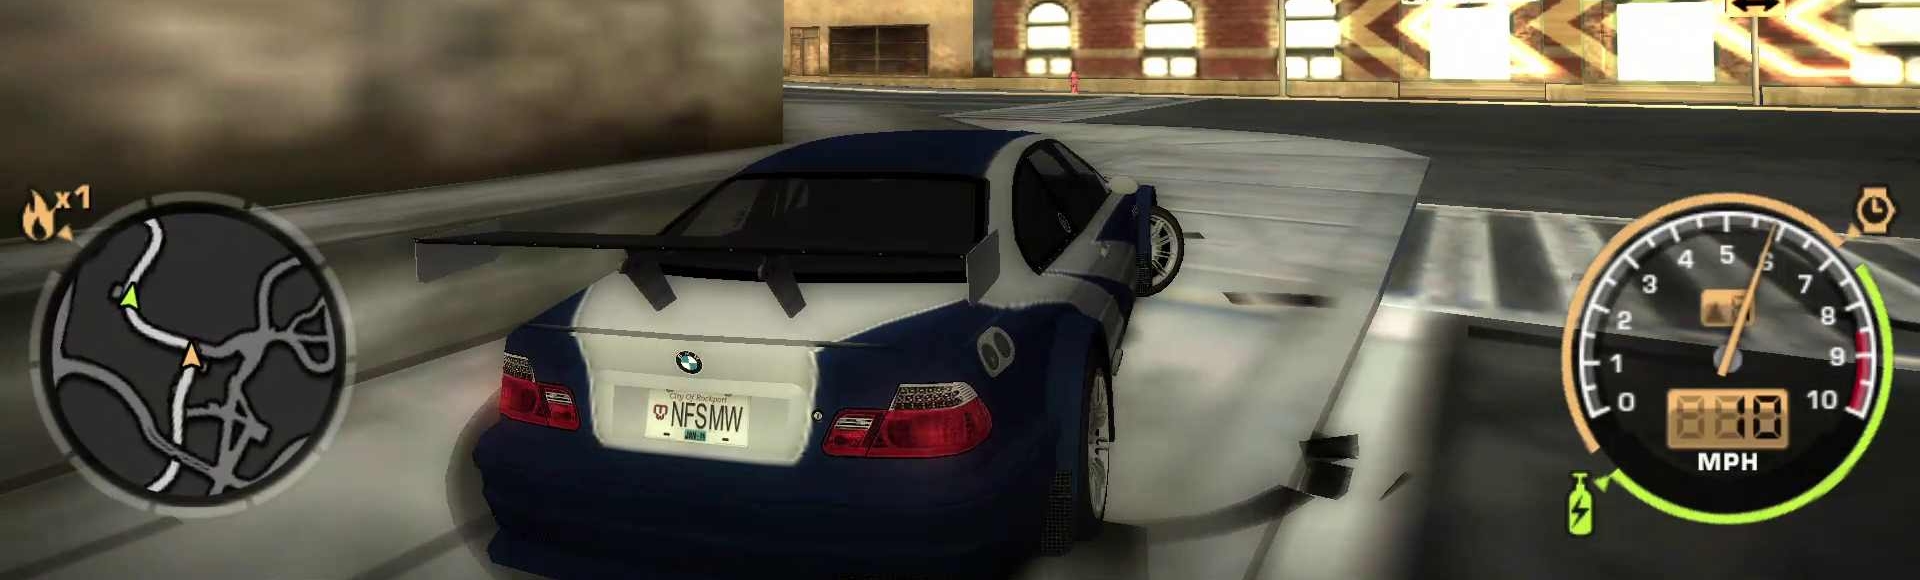 Nfs most wanted highly compressed 10mb for pc